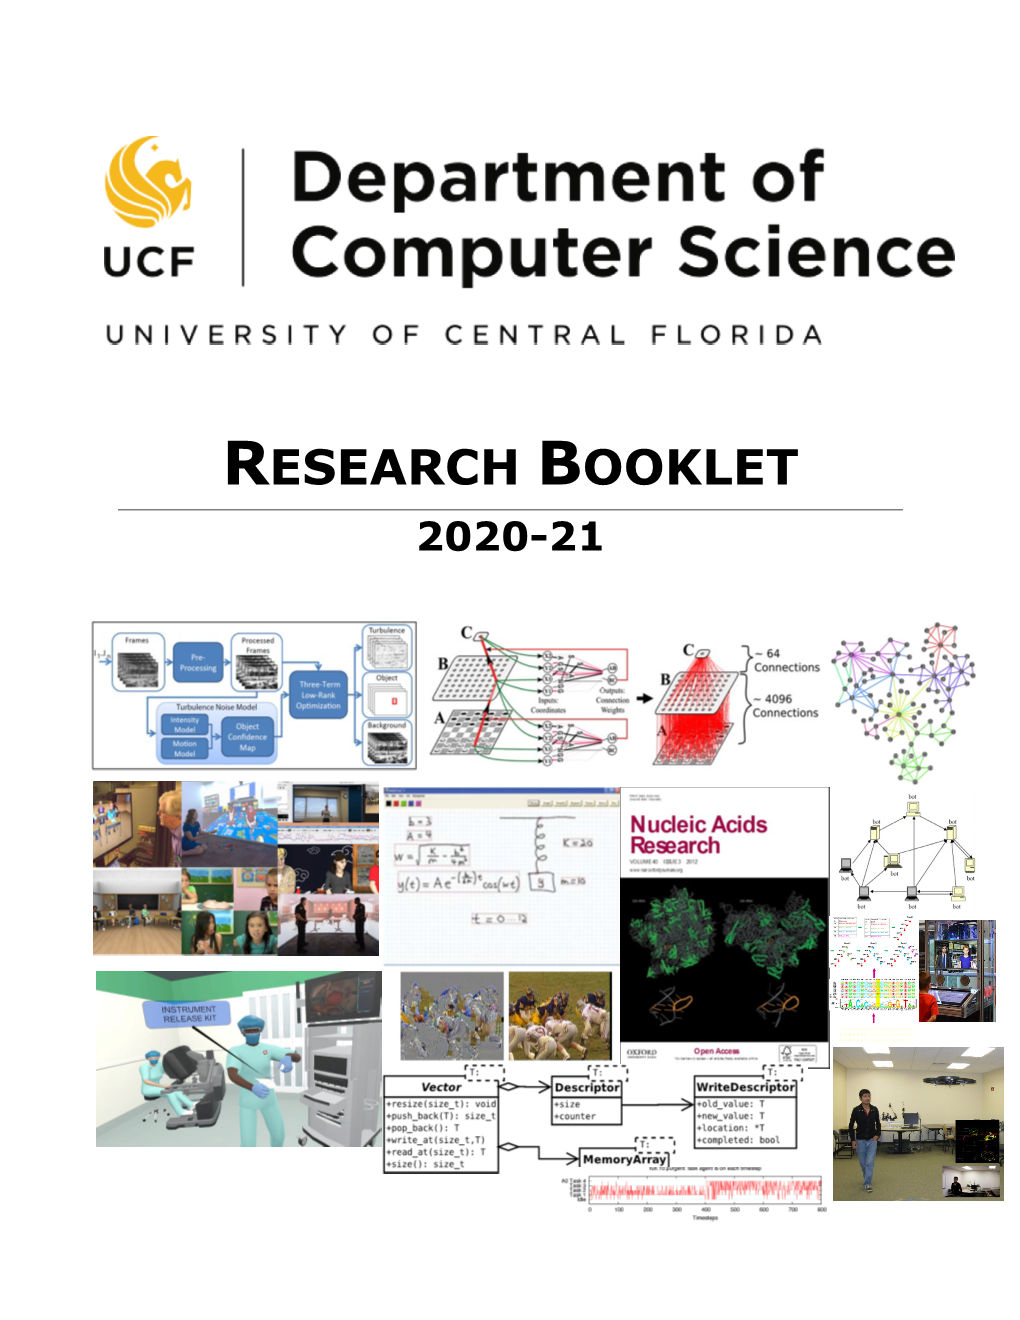 Research Booklet 2020-21